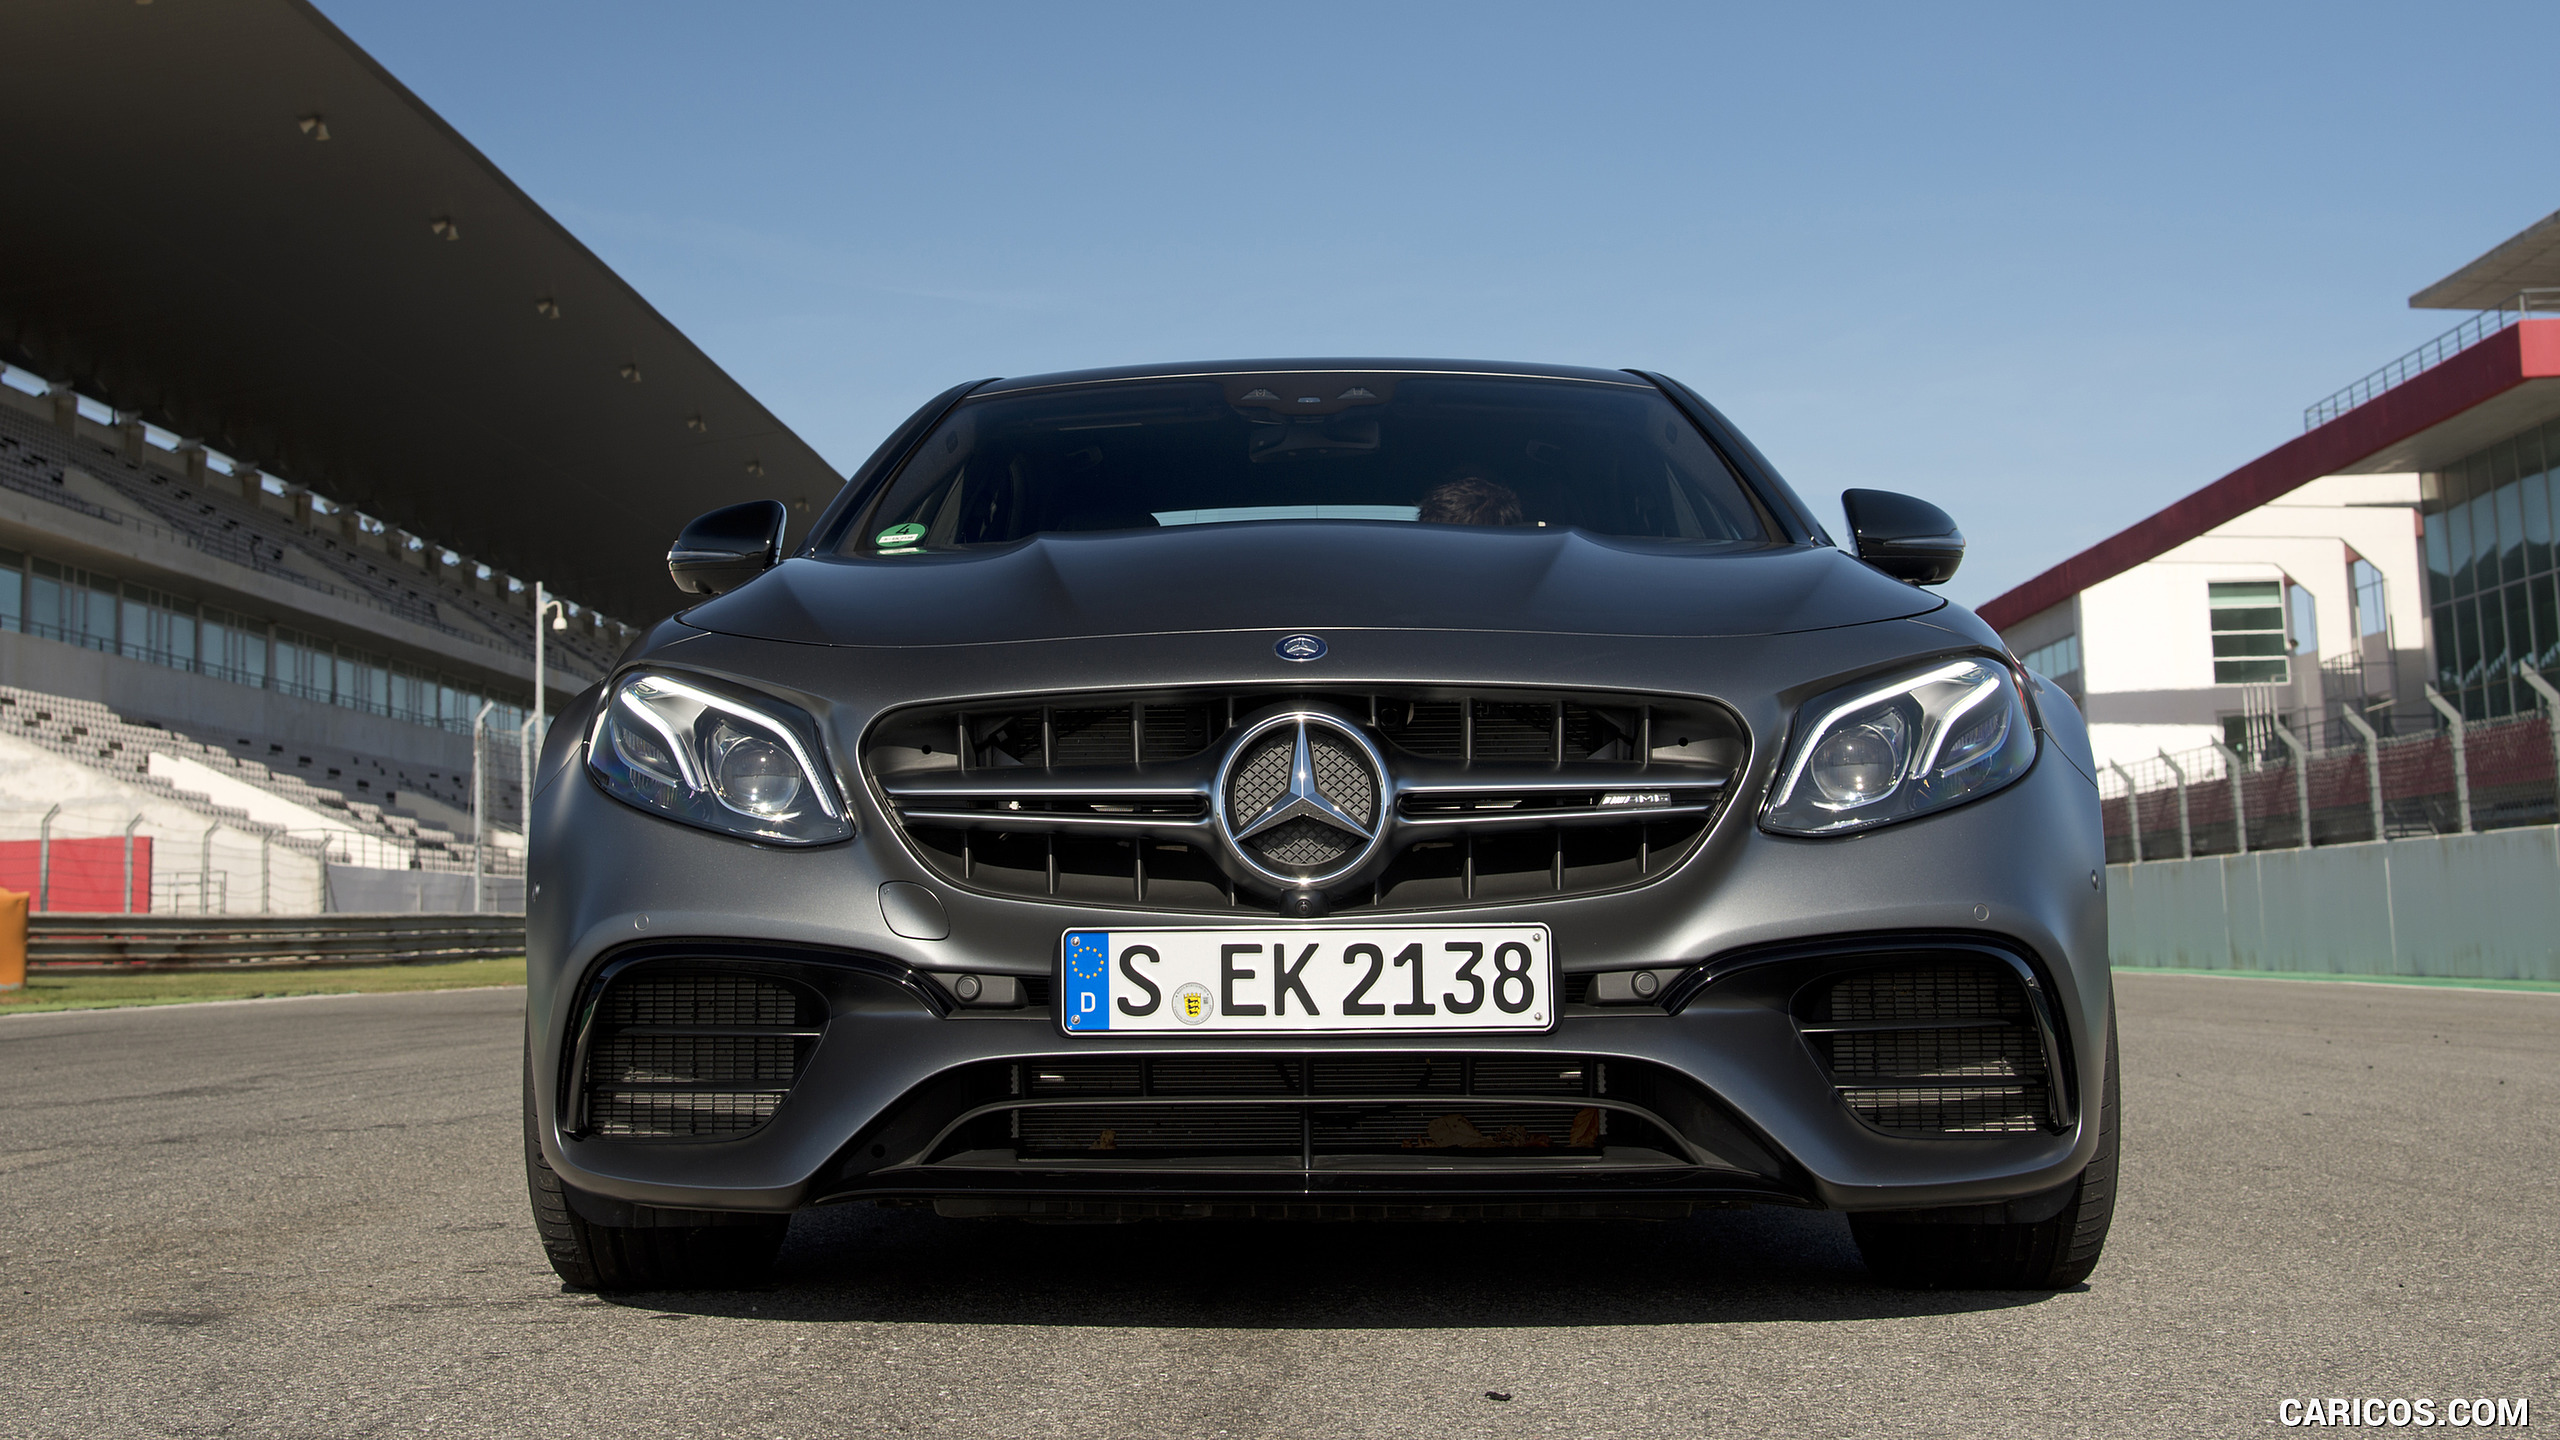 2018 Mercedes-AMG E63 S 4MATIC+ - Front, #276 of 323